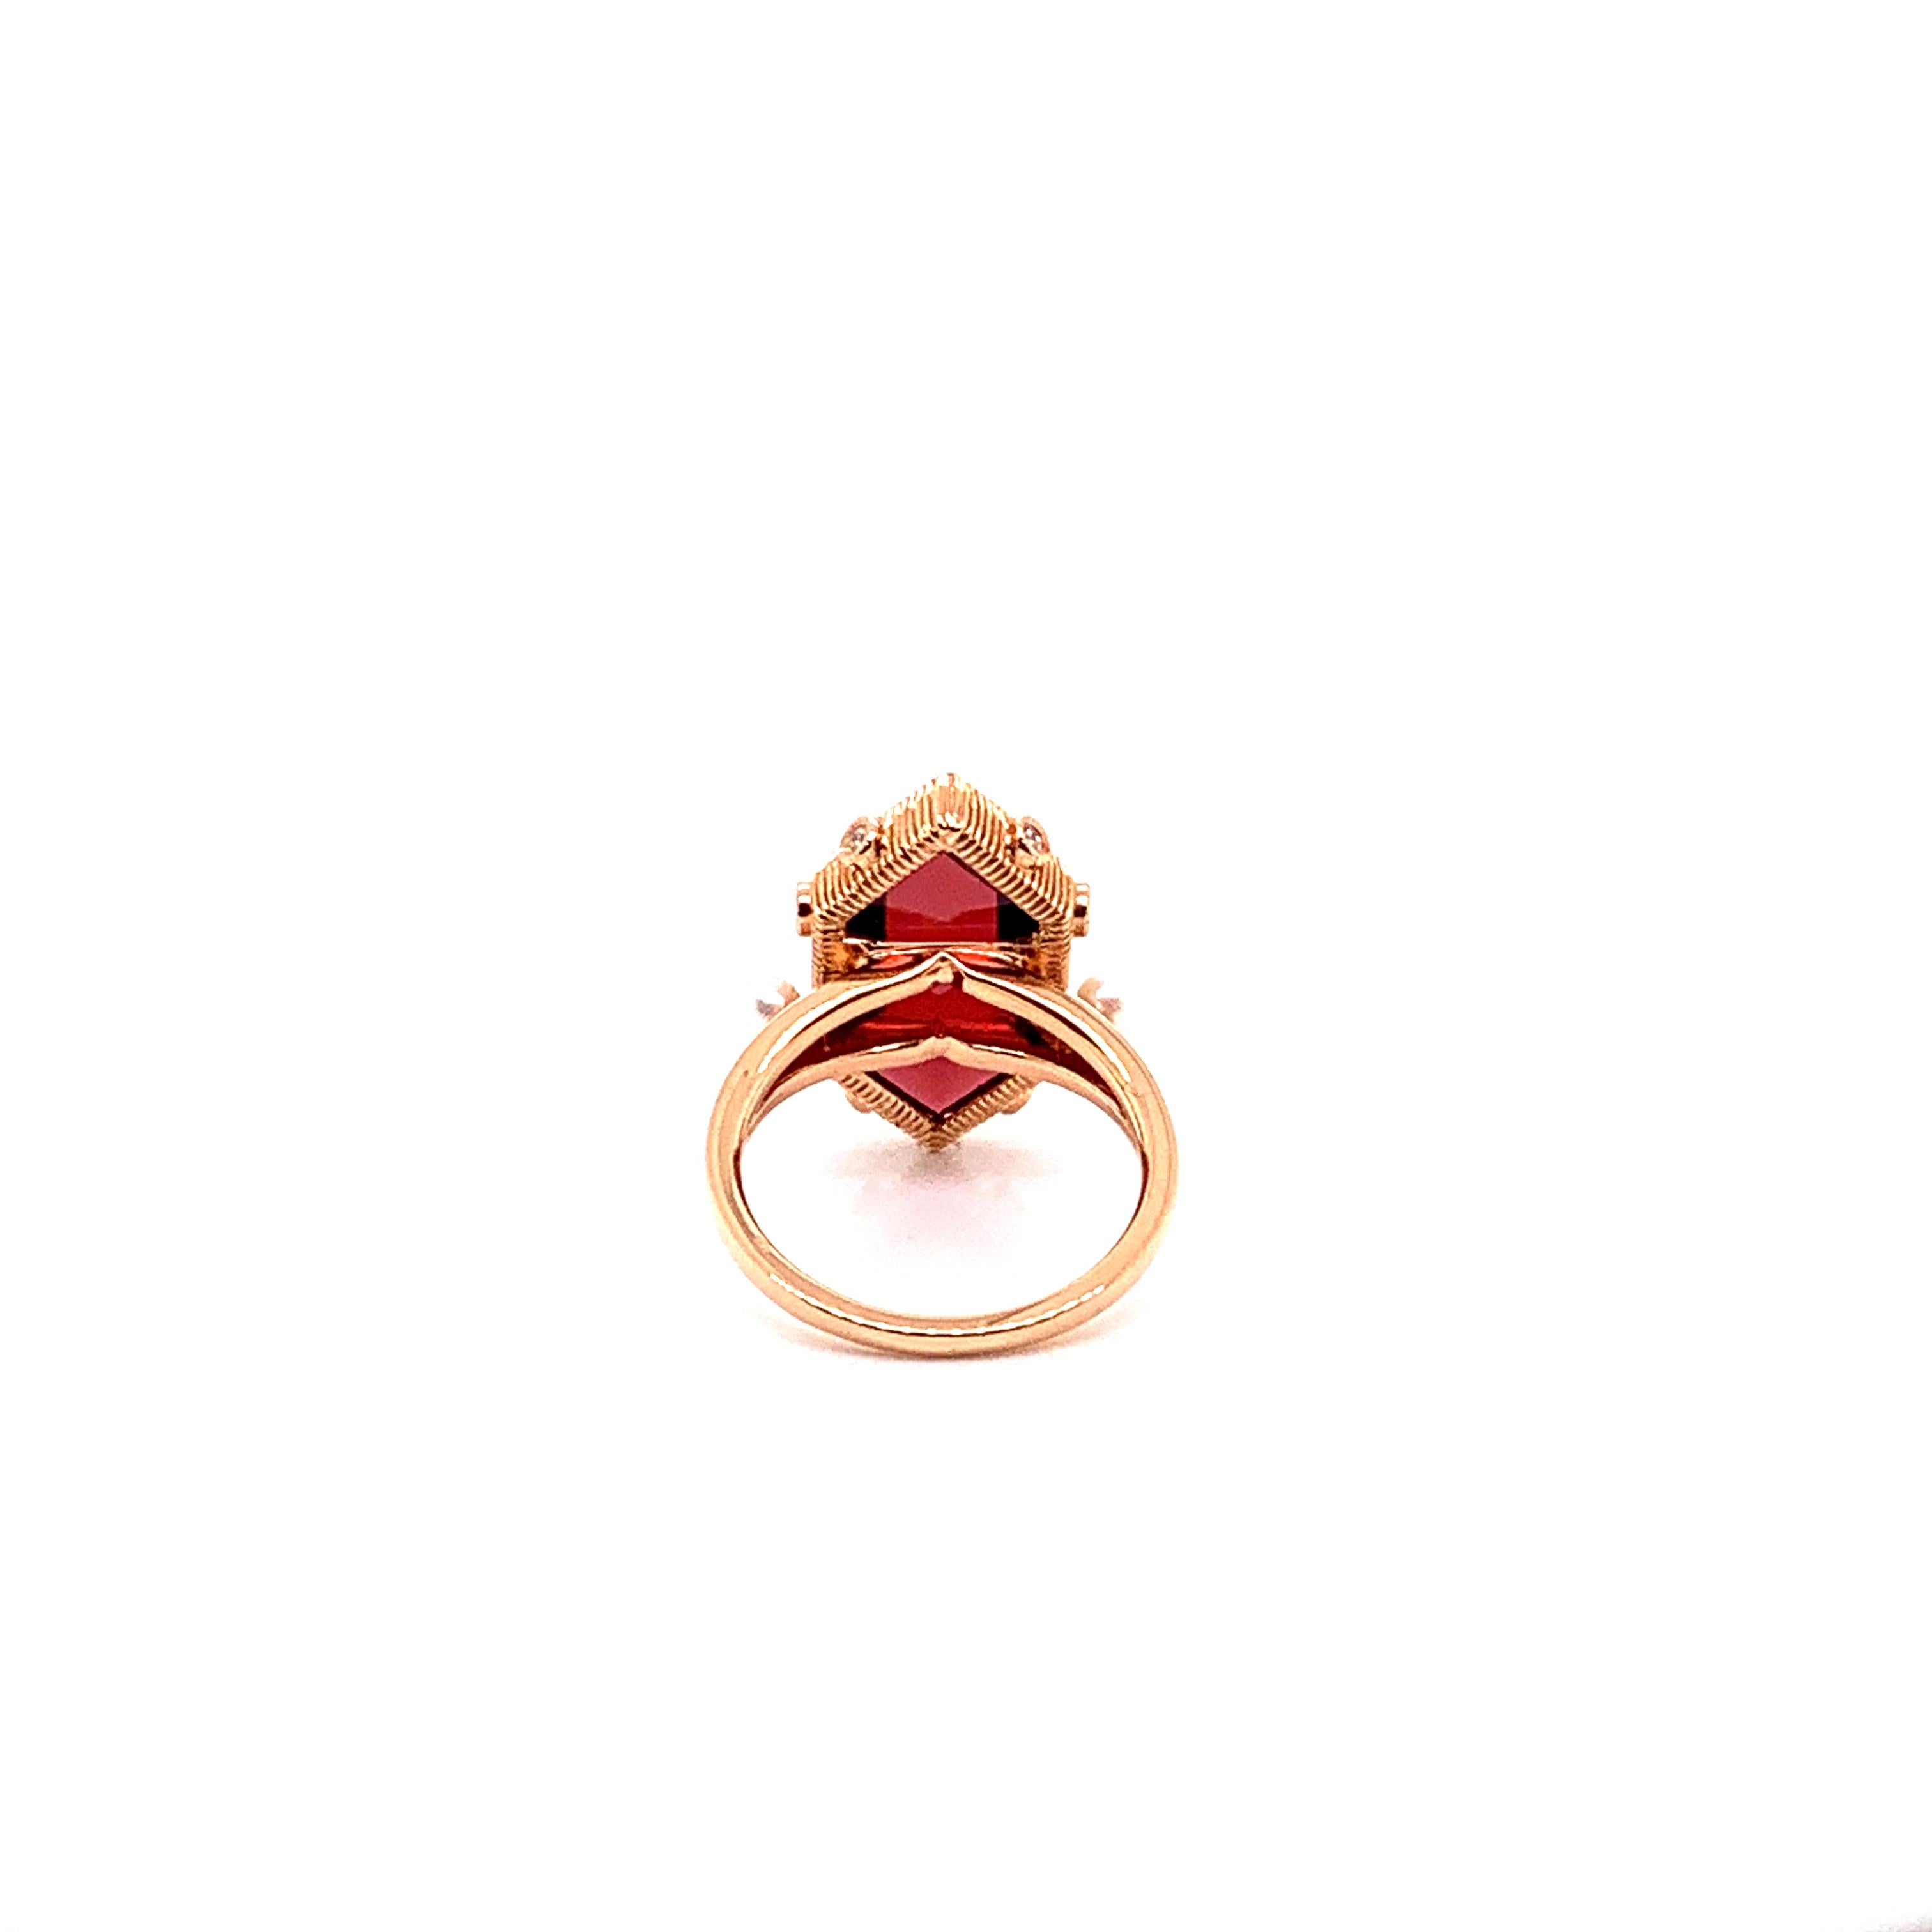 Hexagon Cut 11.85 Carat Red Garnet Ring in 18 Karat Rose Gold with Diamonds and Pearls For Sale